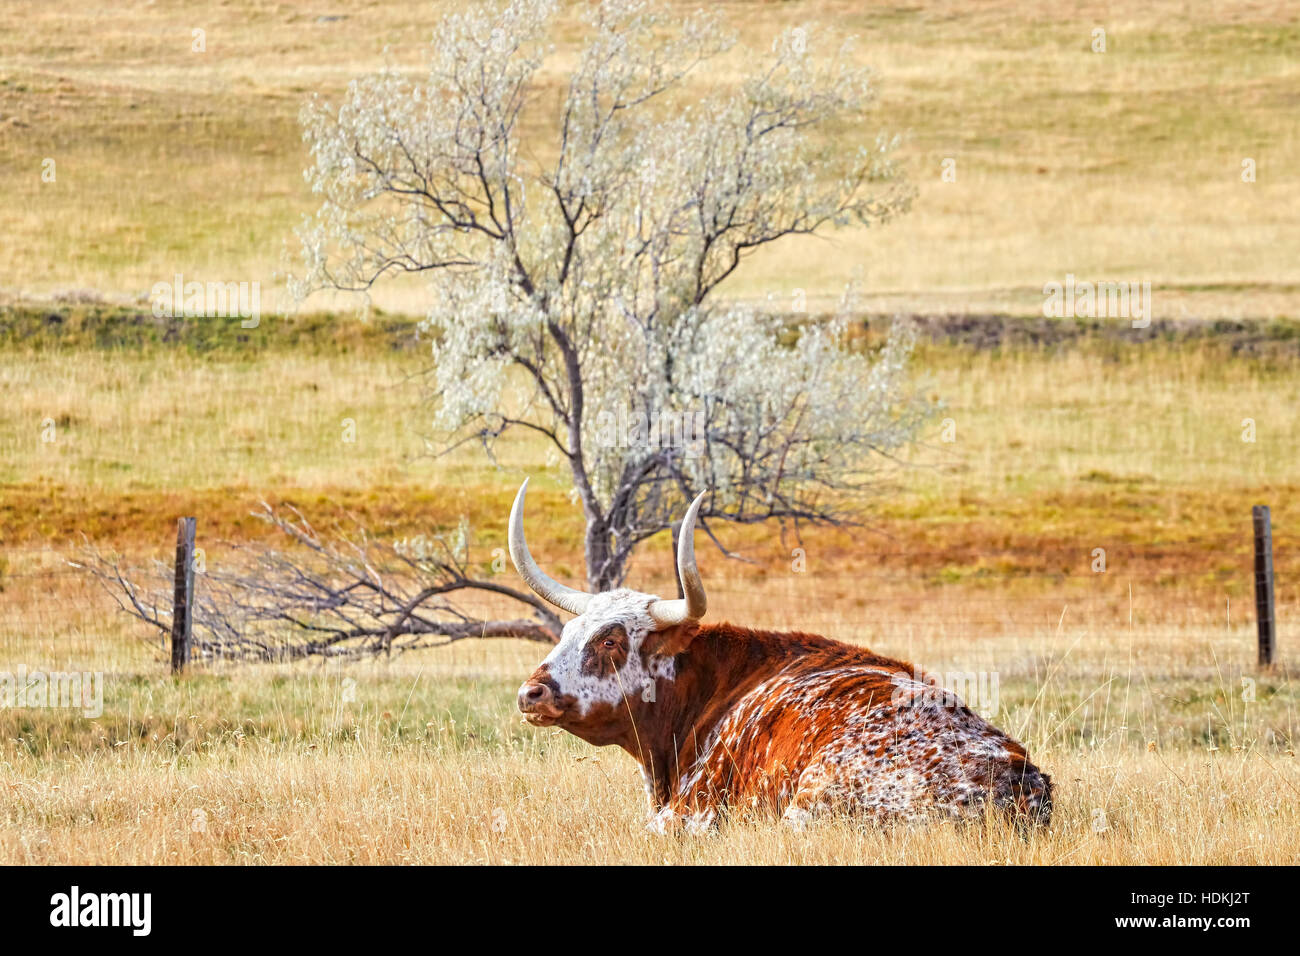 Texas Longhorn cow lying on a dry autumn pasture. Stock Photo